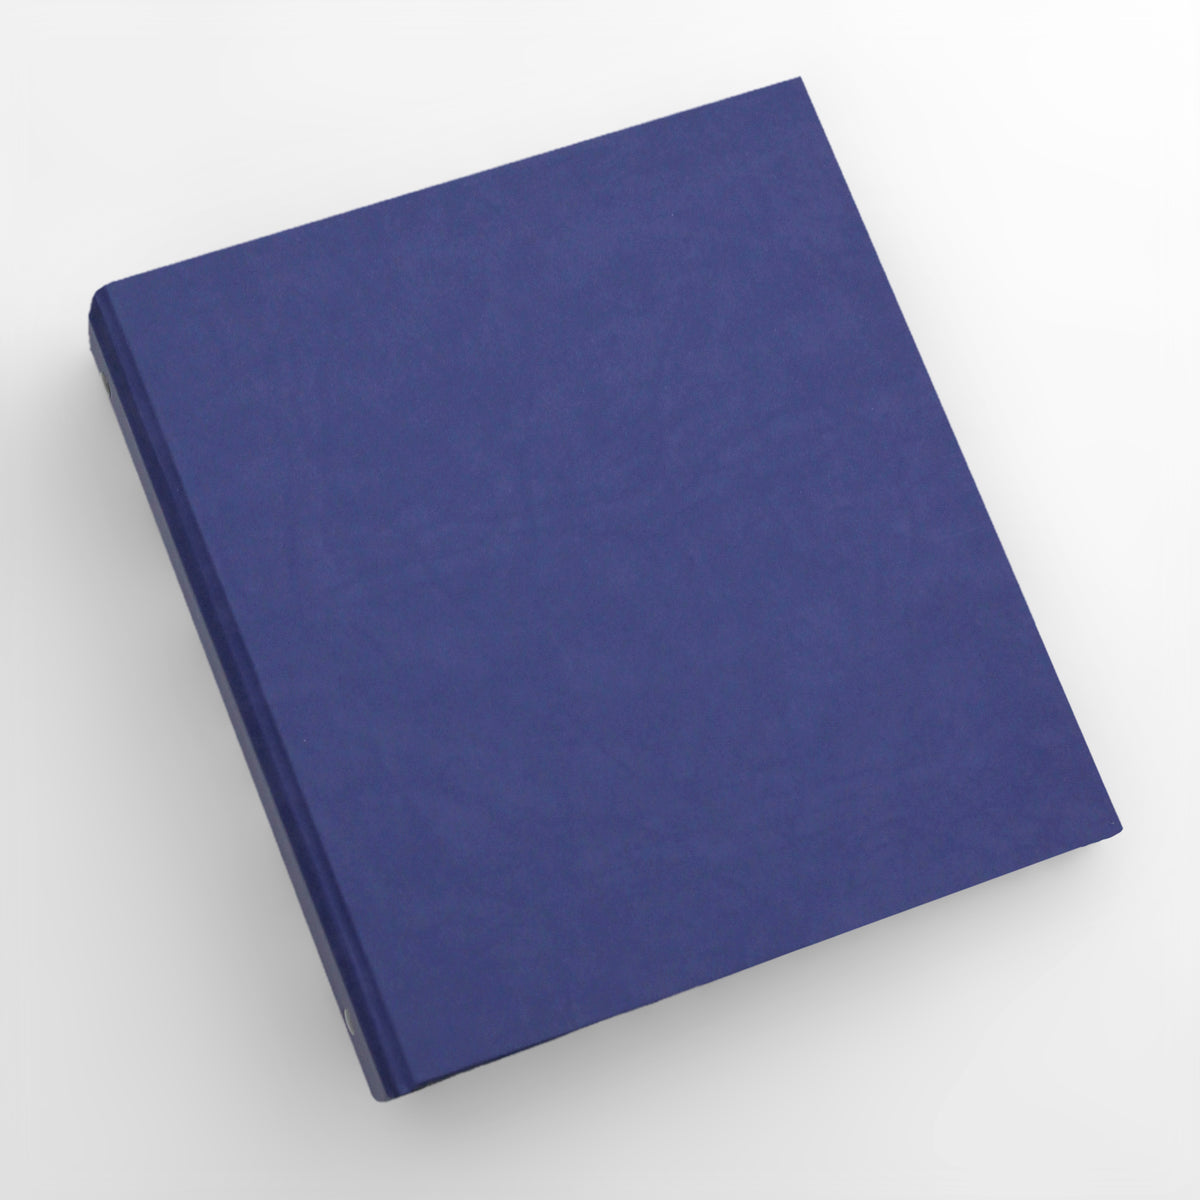 Large Photo Binder For 8x10 Photos | Cover: Indigo Vegan Leather | Available Personalized